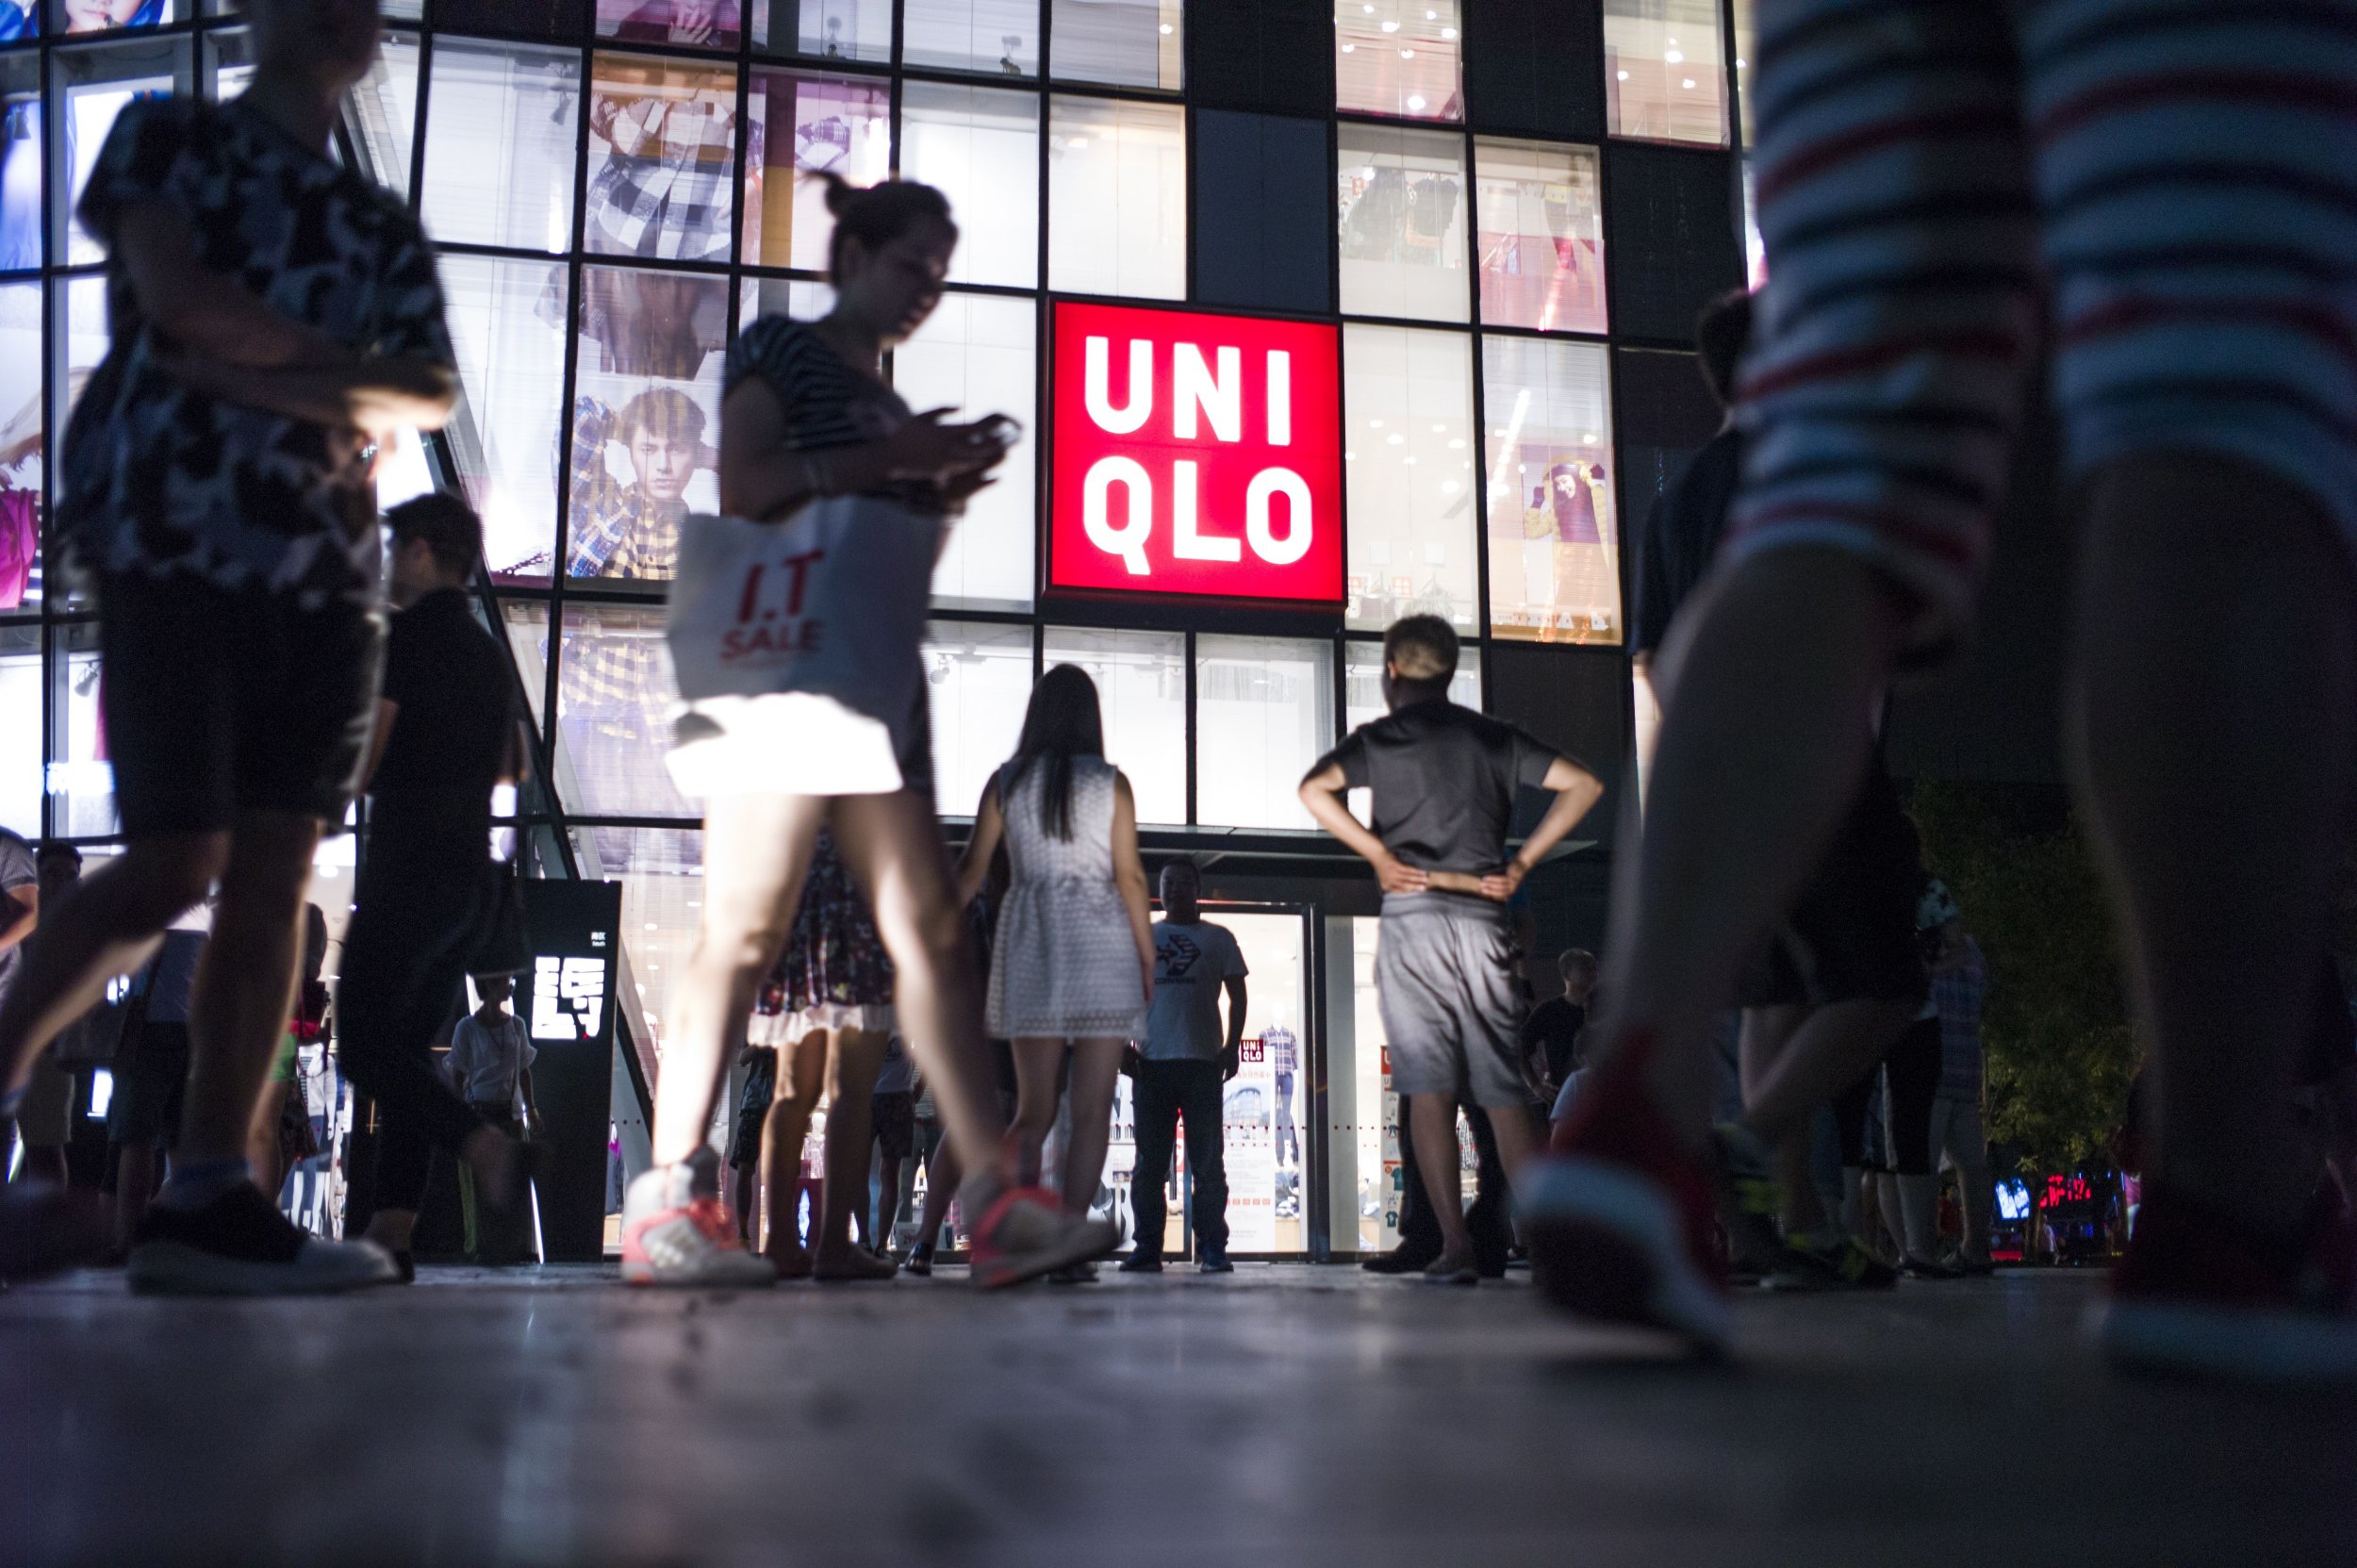 Uniqlo Store Sex Video Fallout China Orders Removal Of Amateur Porn From Social Media IBTimes